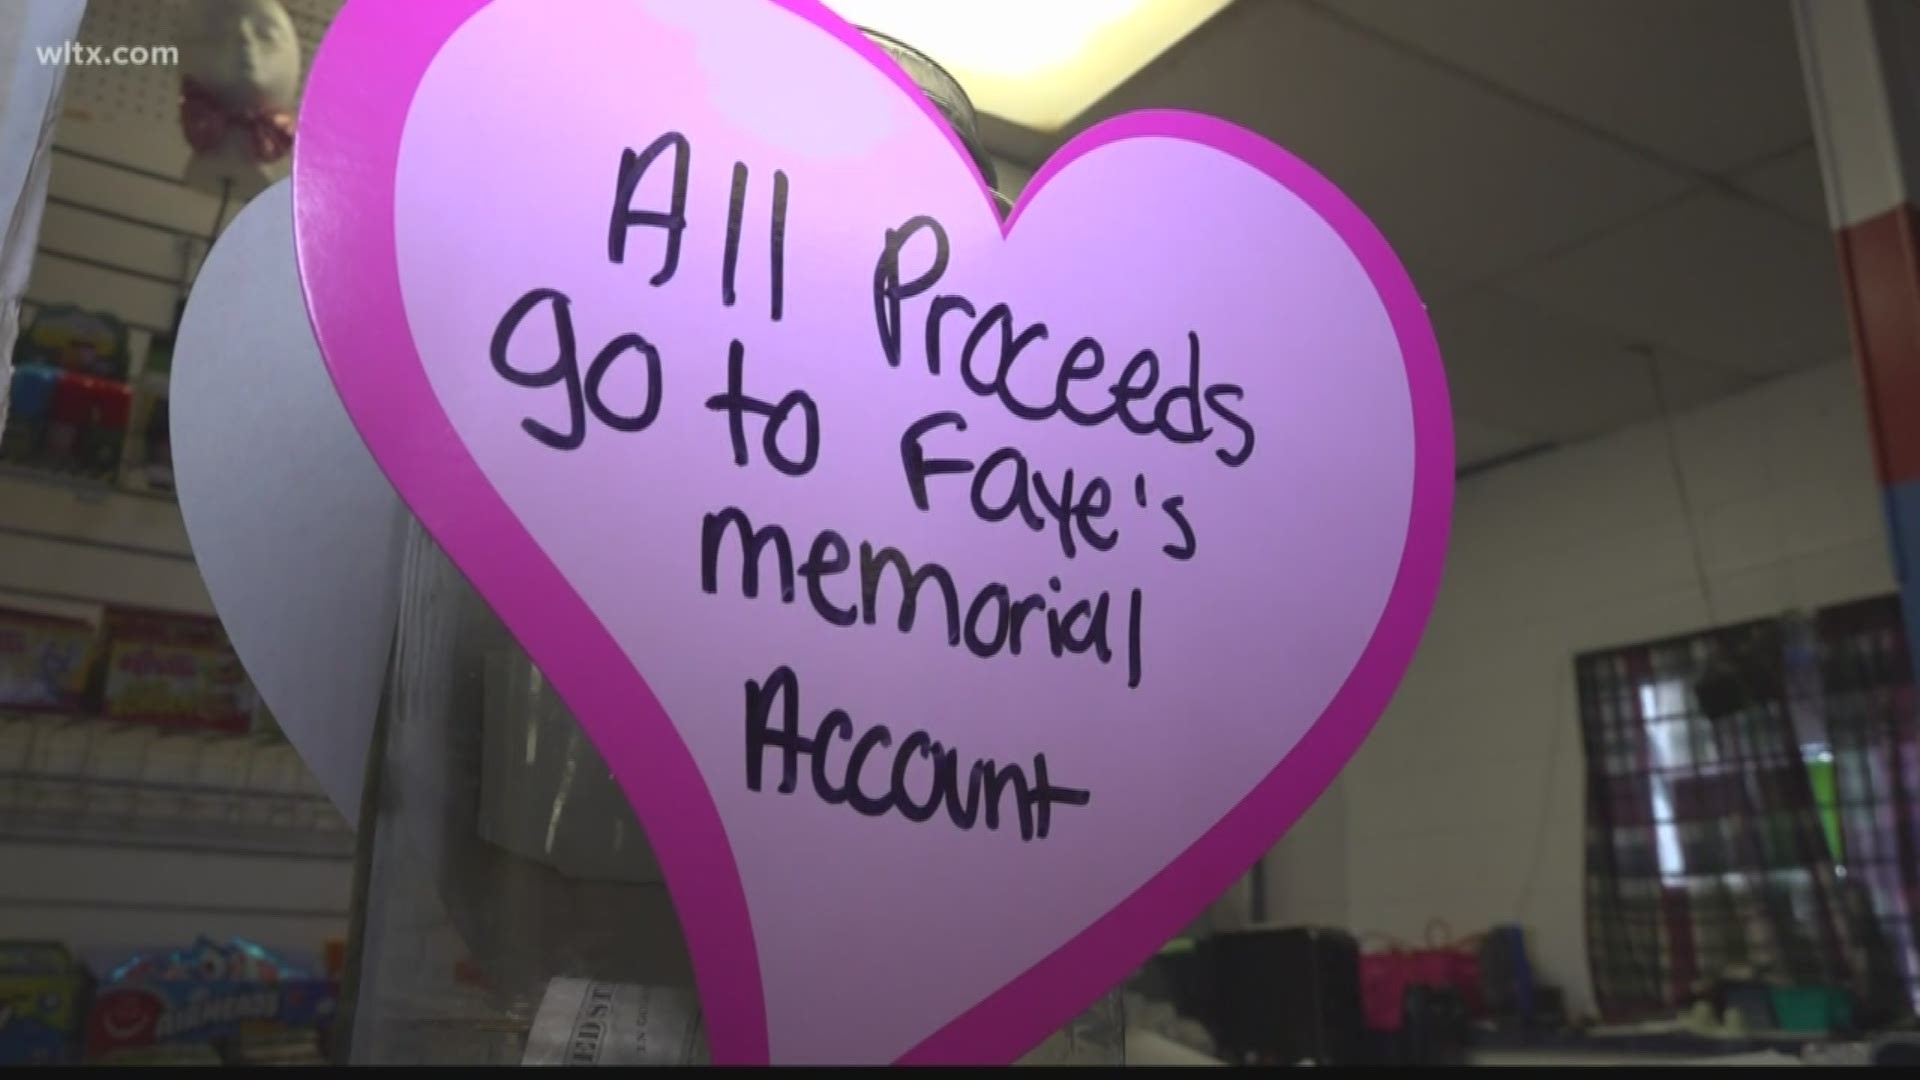 The event raised $500 for the family of Faye Swetlik, the 6-year-old girl found dead in her Cayce neighborhood last week.